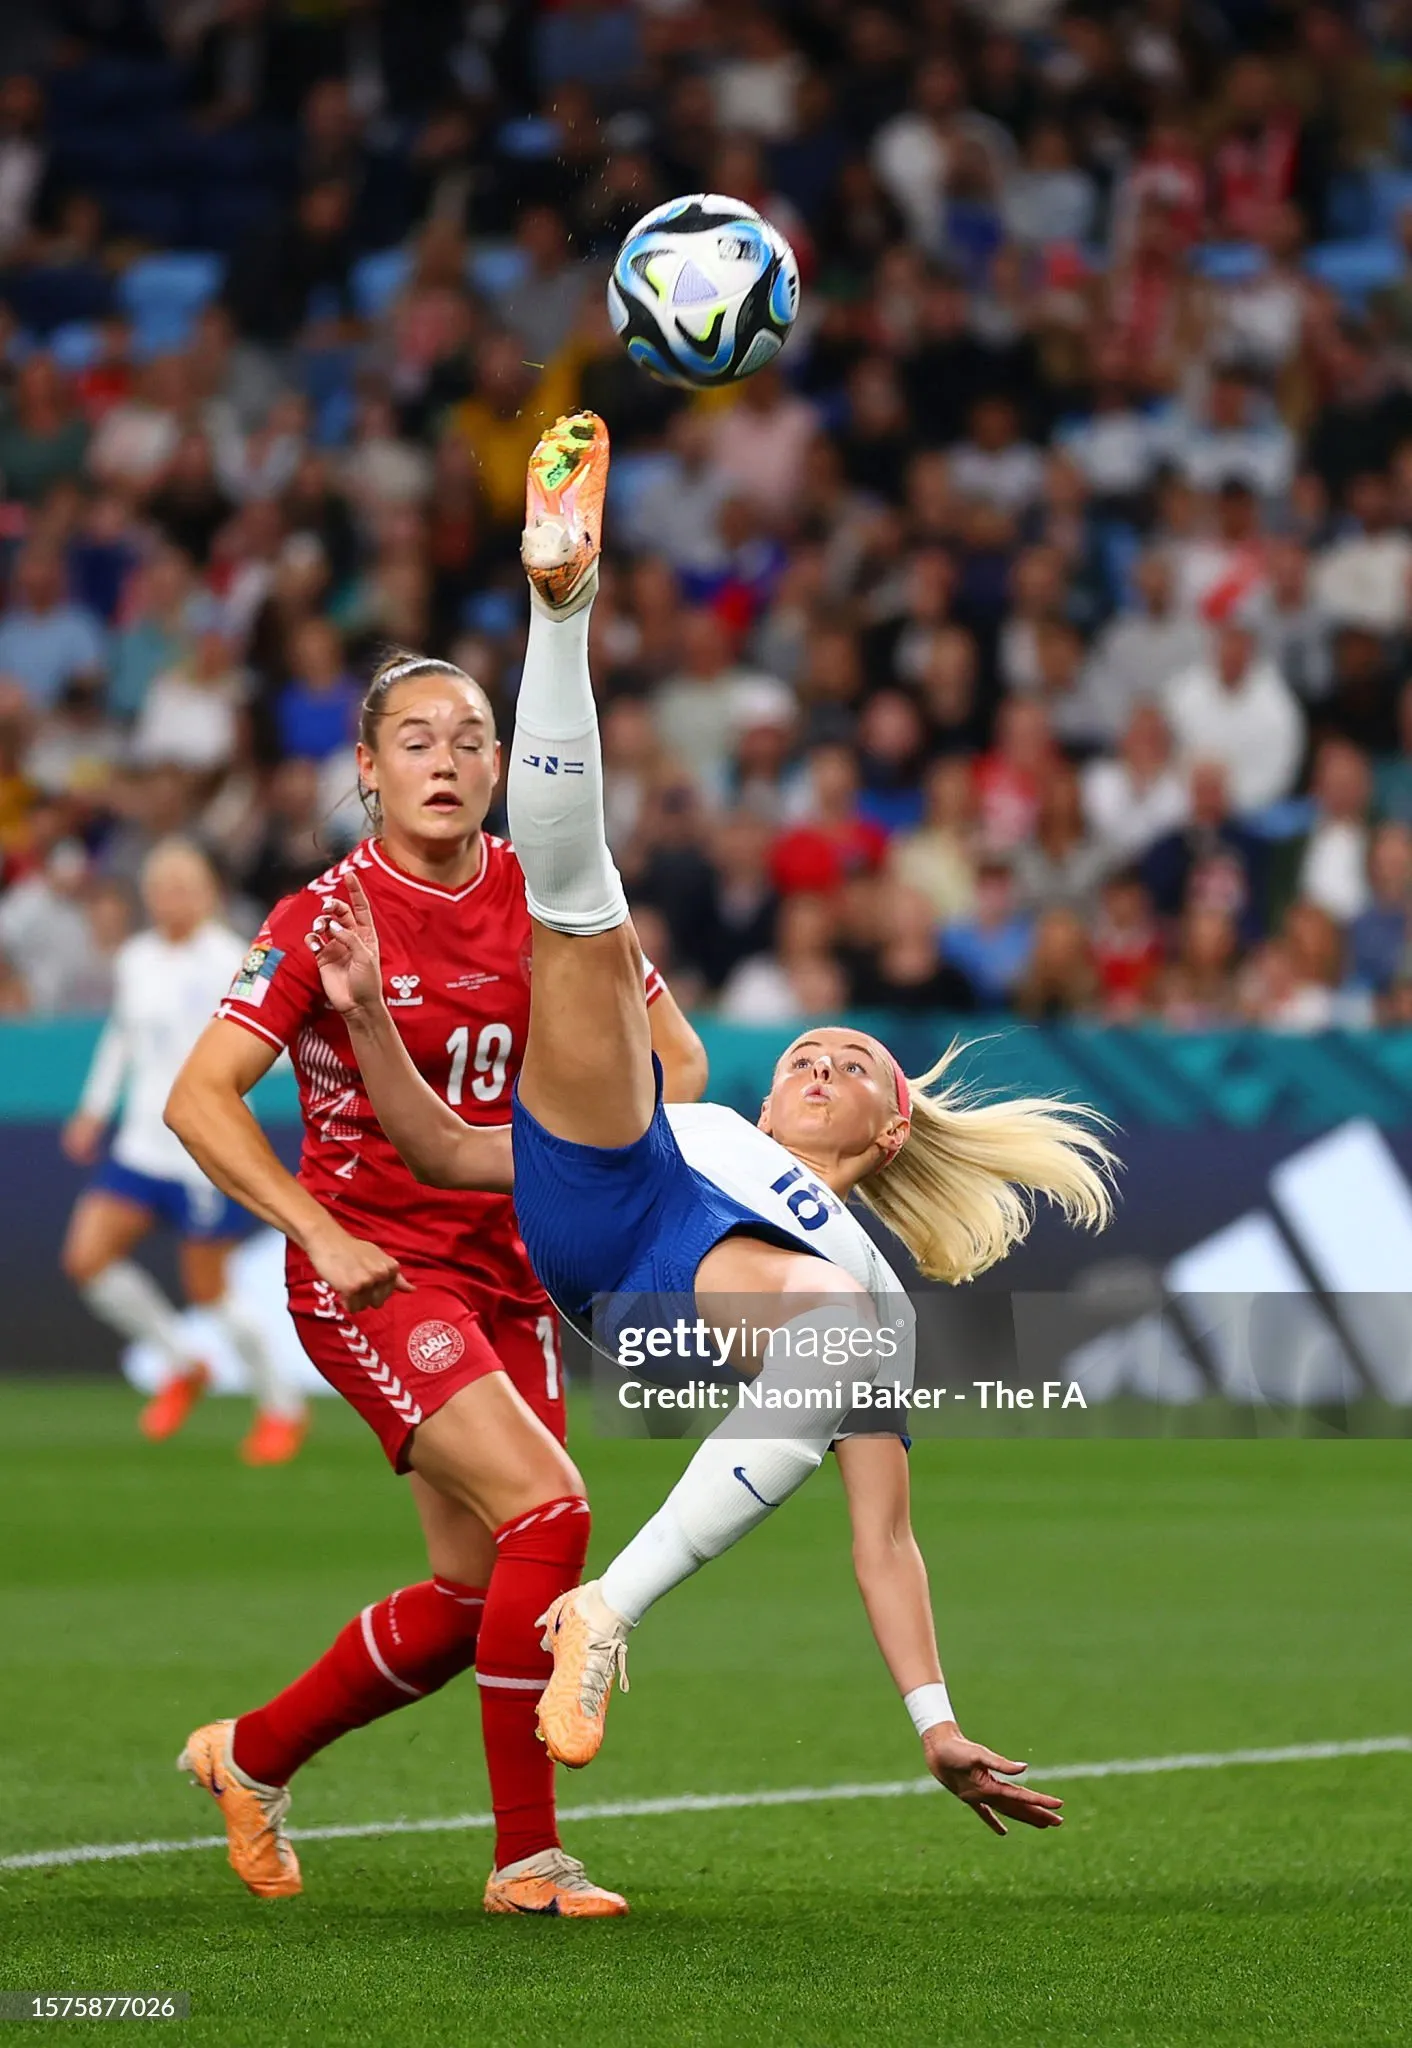 Chloe Kelly of England performs a bicycle kick during the FIFA Women's World Cup Australia & New Zealand 2023 Group D match between England and Denmark at Sydney Football Stadium on July 28, 2023 in Sydney, Australia.   Photo by Naomi Baker - The FA/The FA via Getty Images